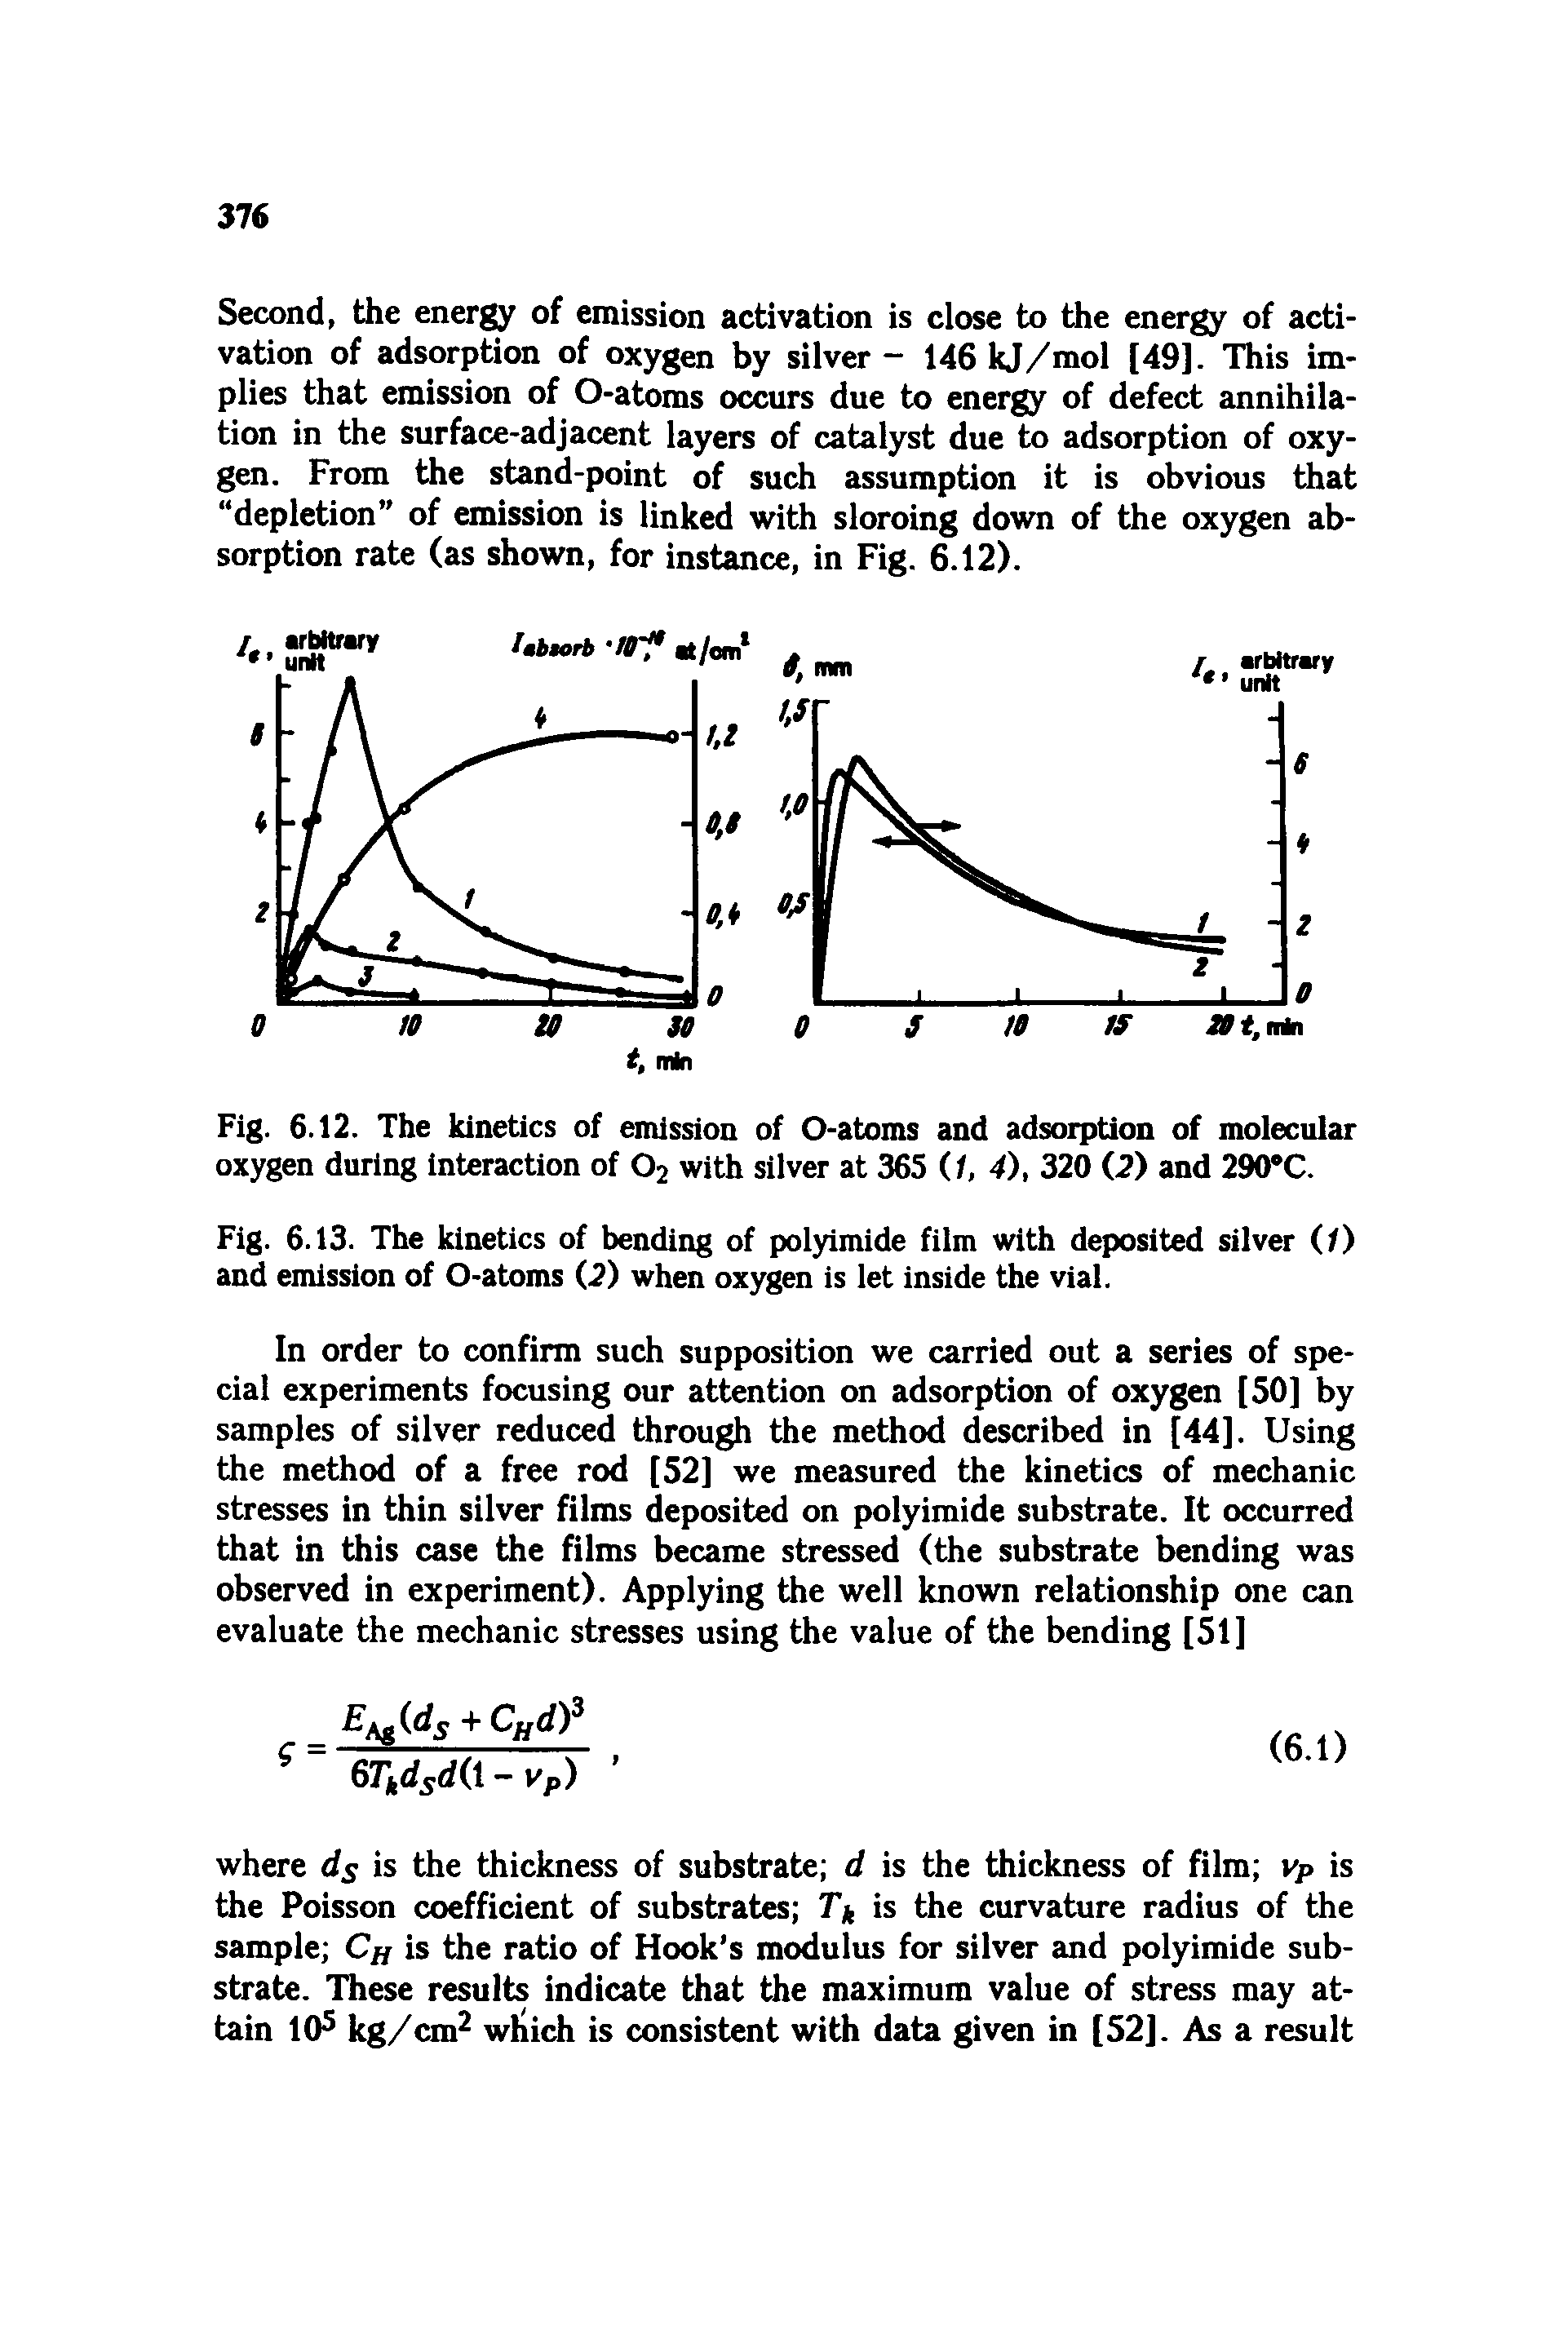 Fig. 6.13. The kinetics of bending of polyimide film with deposited silver (/) and emission of O-atoms (2) when oxygen is let inside the vial.